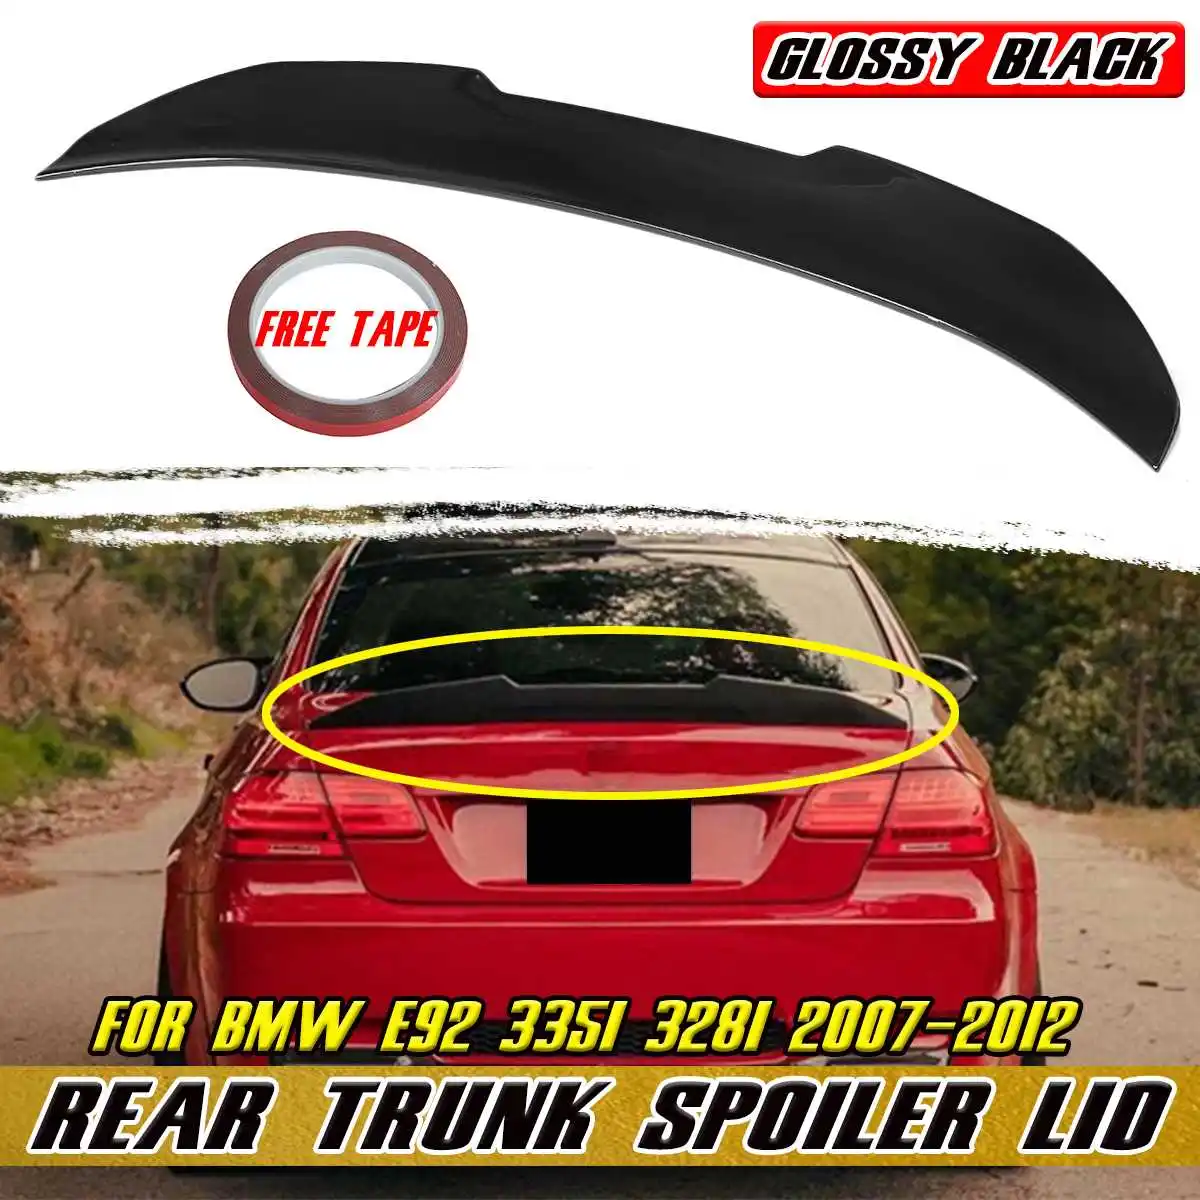 PSM Style Car Rear Trunk Boot Lip Spoiler Wing Lip For BMW E92 335i 328i 2007-2012 Rear Trunk Spoiler Lid Tail Wing Decoration